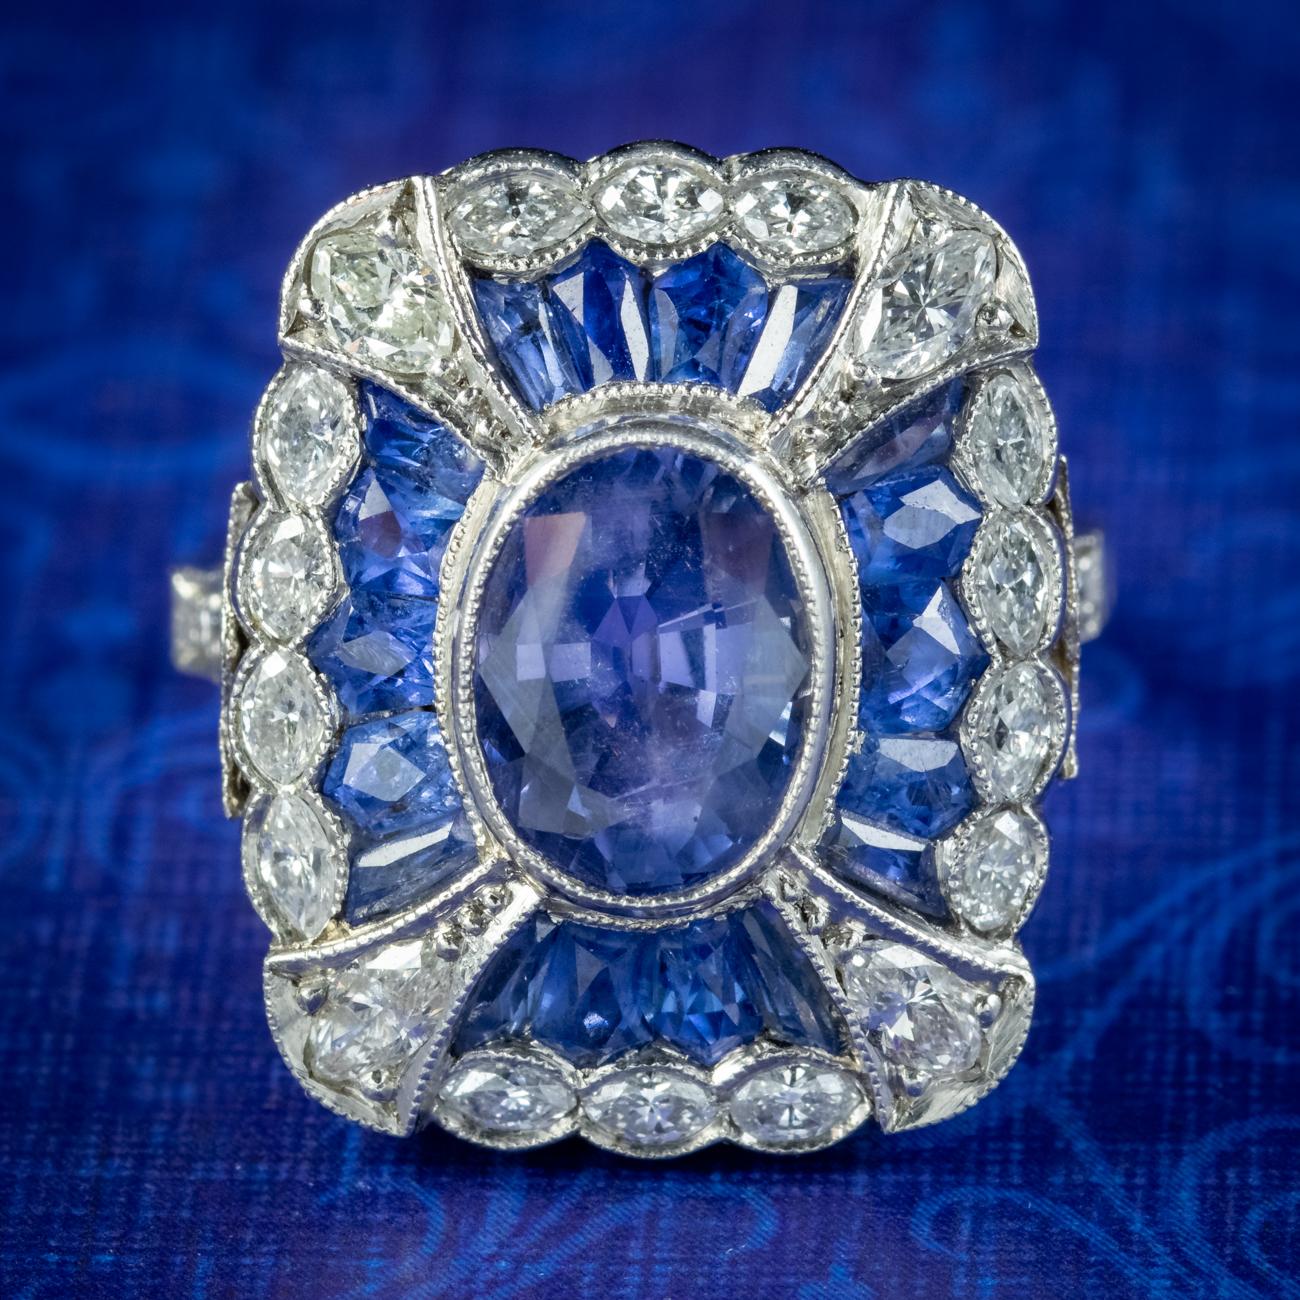 An extravagant Art Deco cocktail ring made in France, Circa 1920. The large face is decorated with an array of marquise cut diamonds, French cut sapphires and a larger oval cut sapphire bezel set in the centre (approx. 1.70ct). 

The blue sapphires